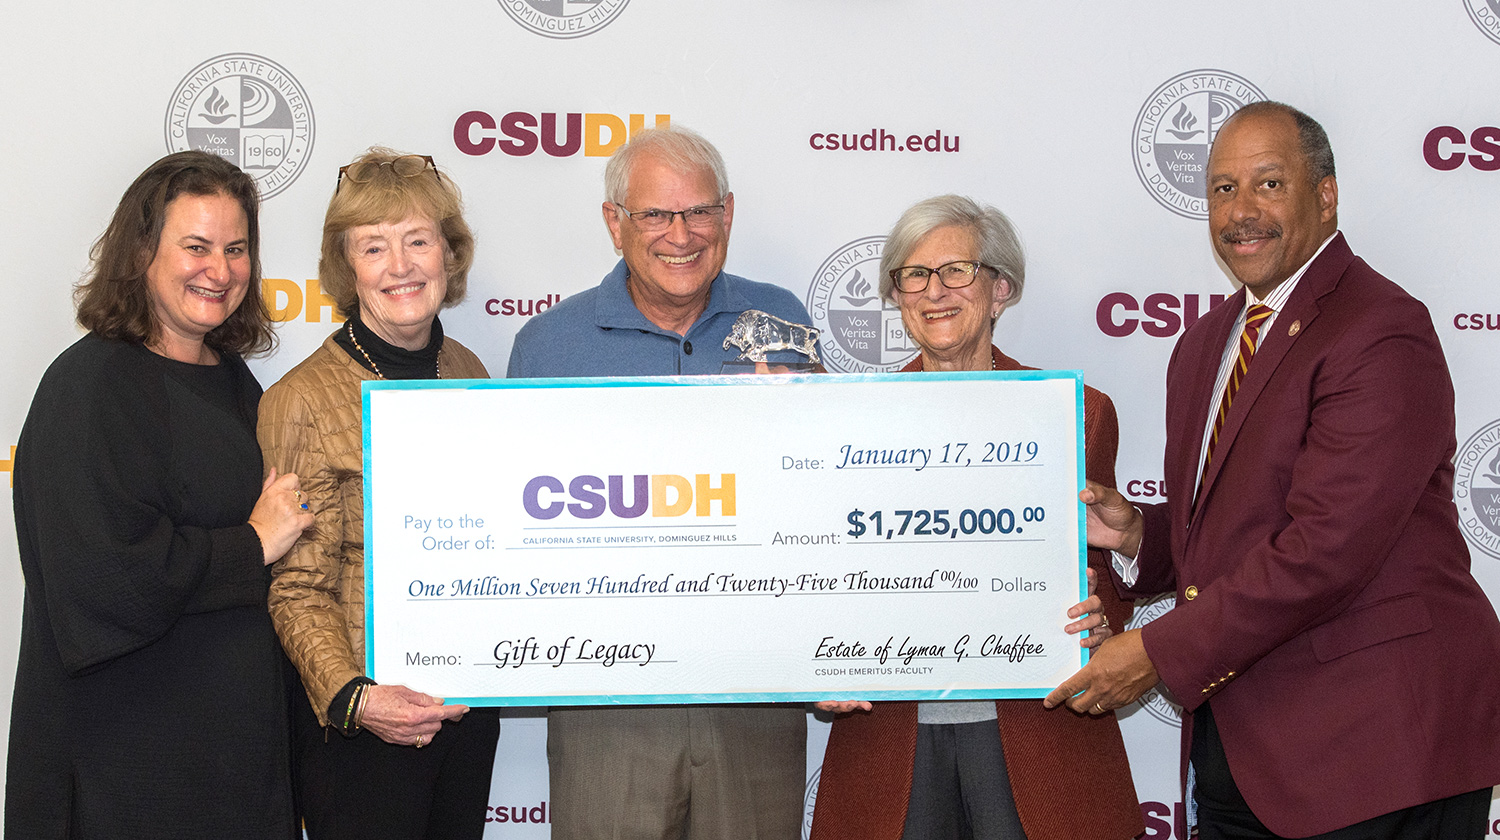 (from left): University Art Gallery Director Aandrea Stang, Marilyn Chaffee, Lyman Chaffee's siblings David Chaffee (Marilyn's husband) and Marta Stang, and CSUDH President Thomas A. Parham.